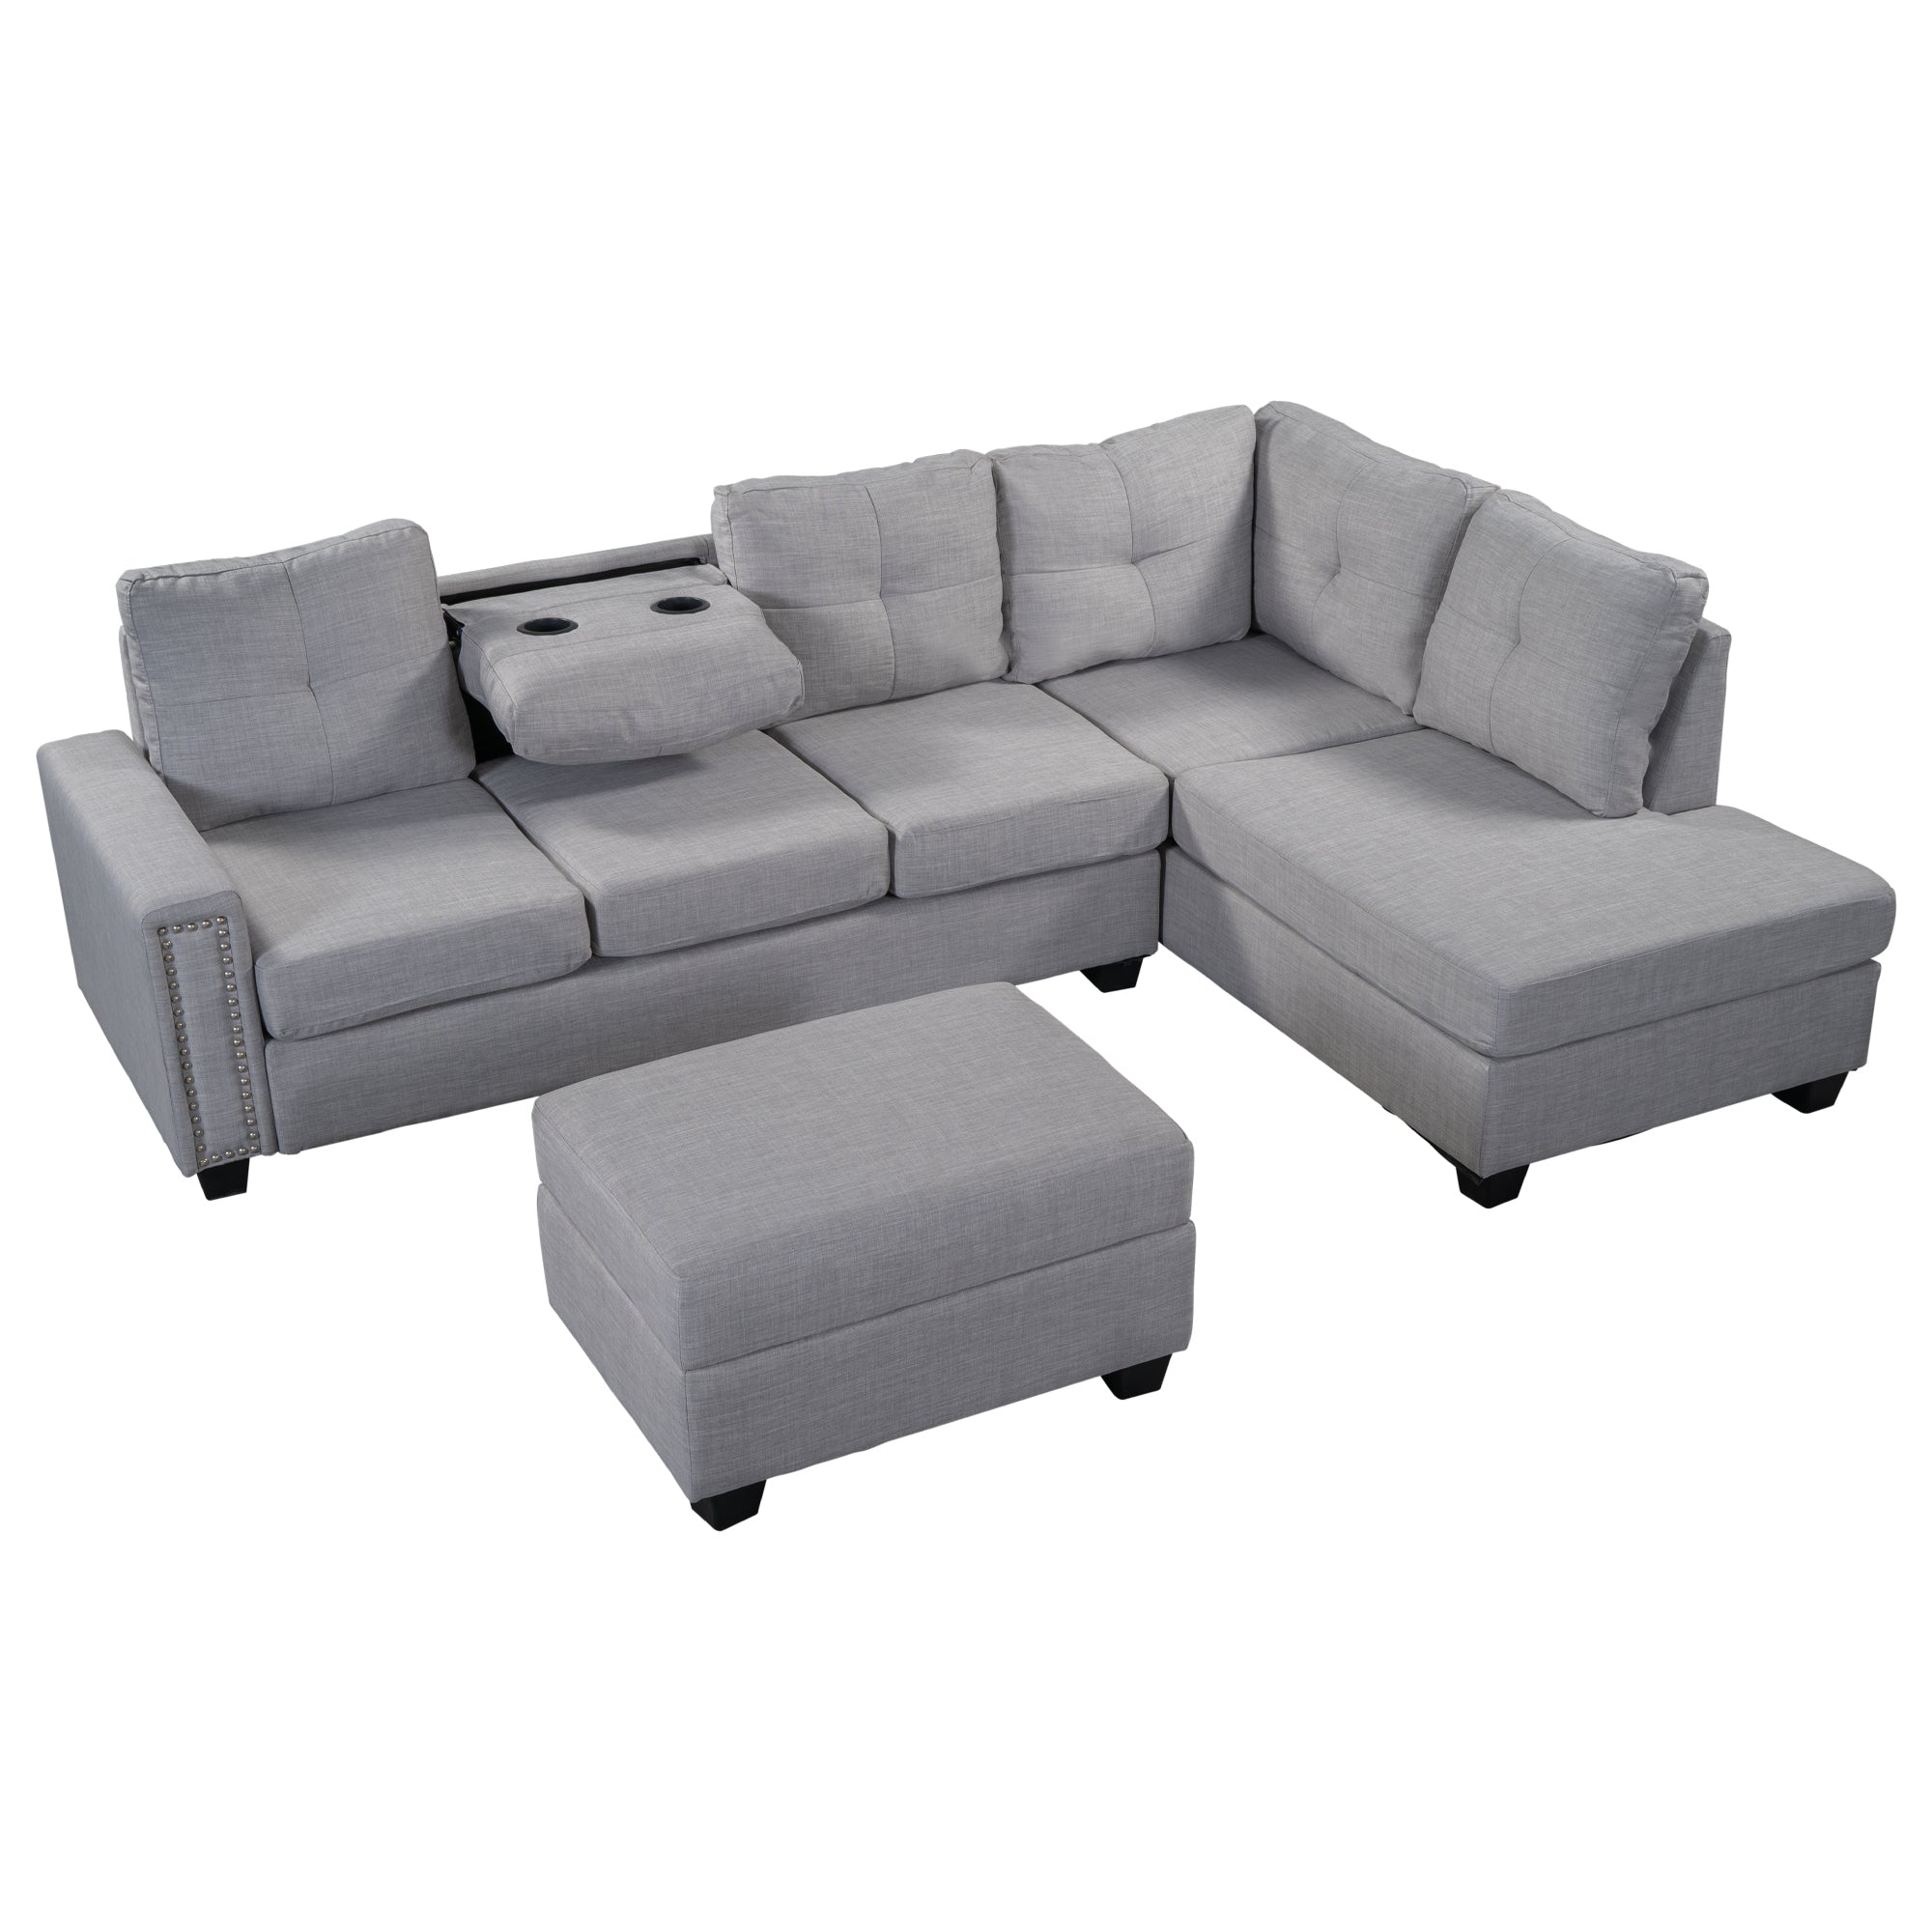 Orisfur Reversible Sectional Sofa with Space-Saving Design and Storage Ottoman | Rivet Ornament L-Shape Couch | Ideal for Large Spaces, Dorms, Apartments-Sofas-American Furniture Outlet